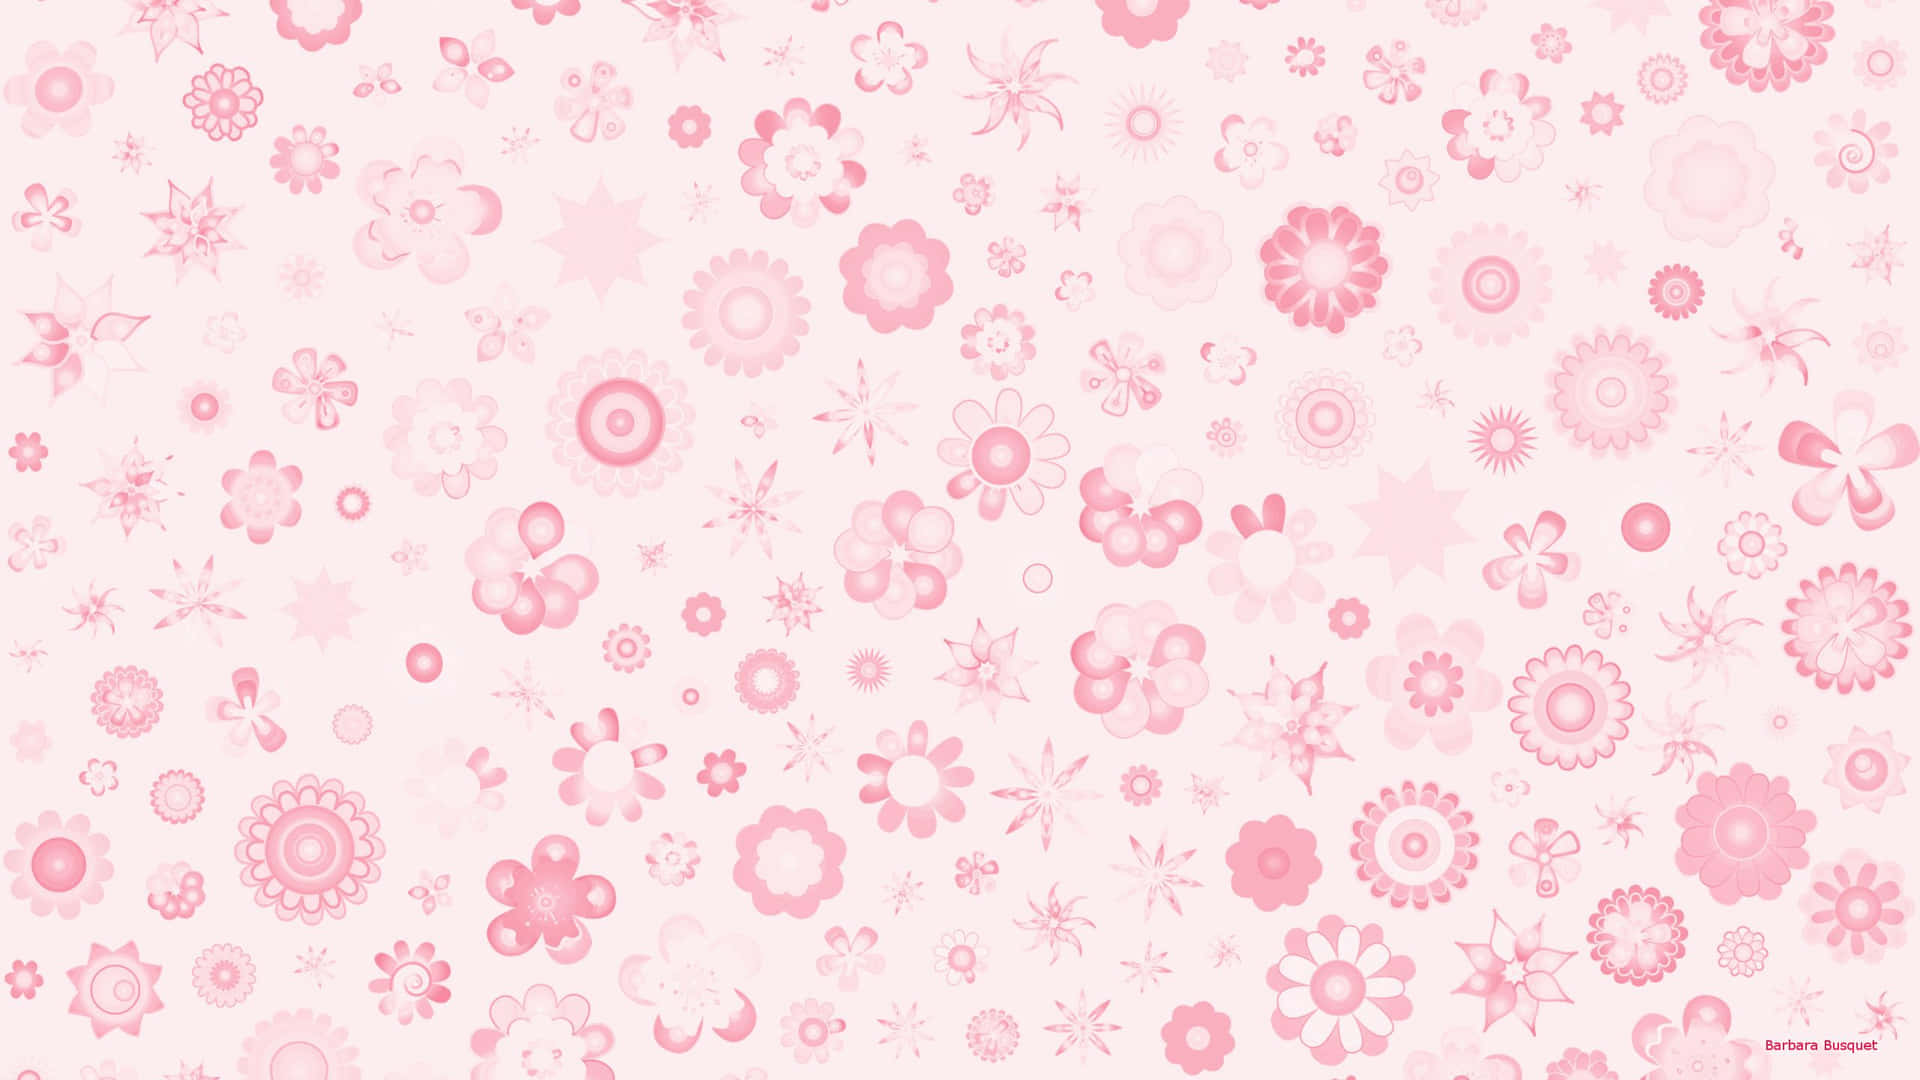 Get Spirited Away with This Cool Pink Snappy Abstract Background